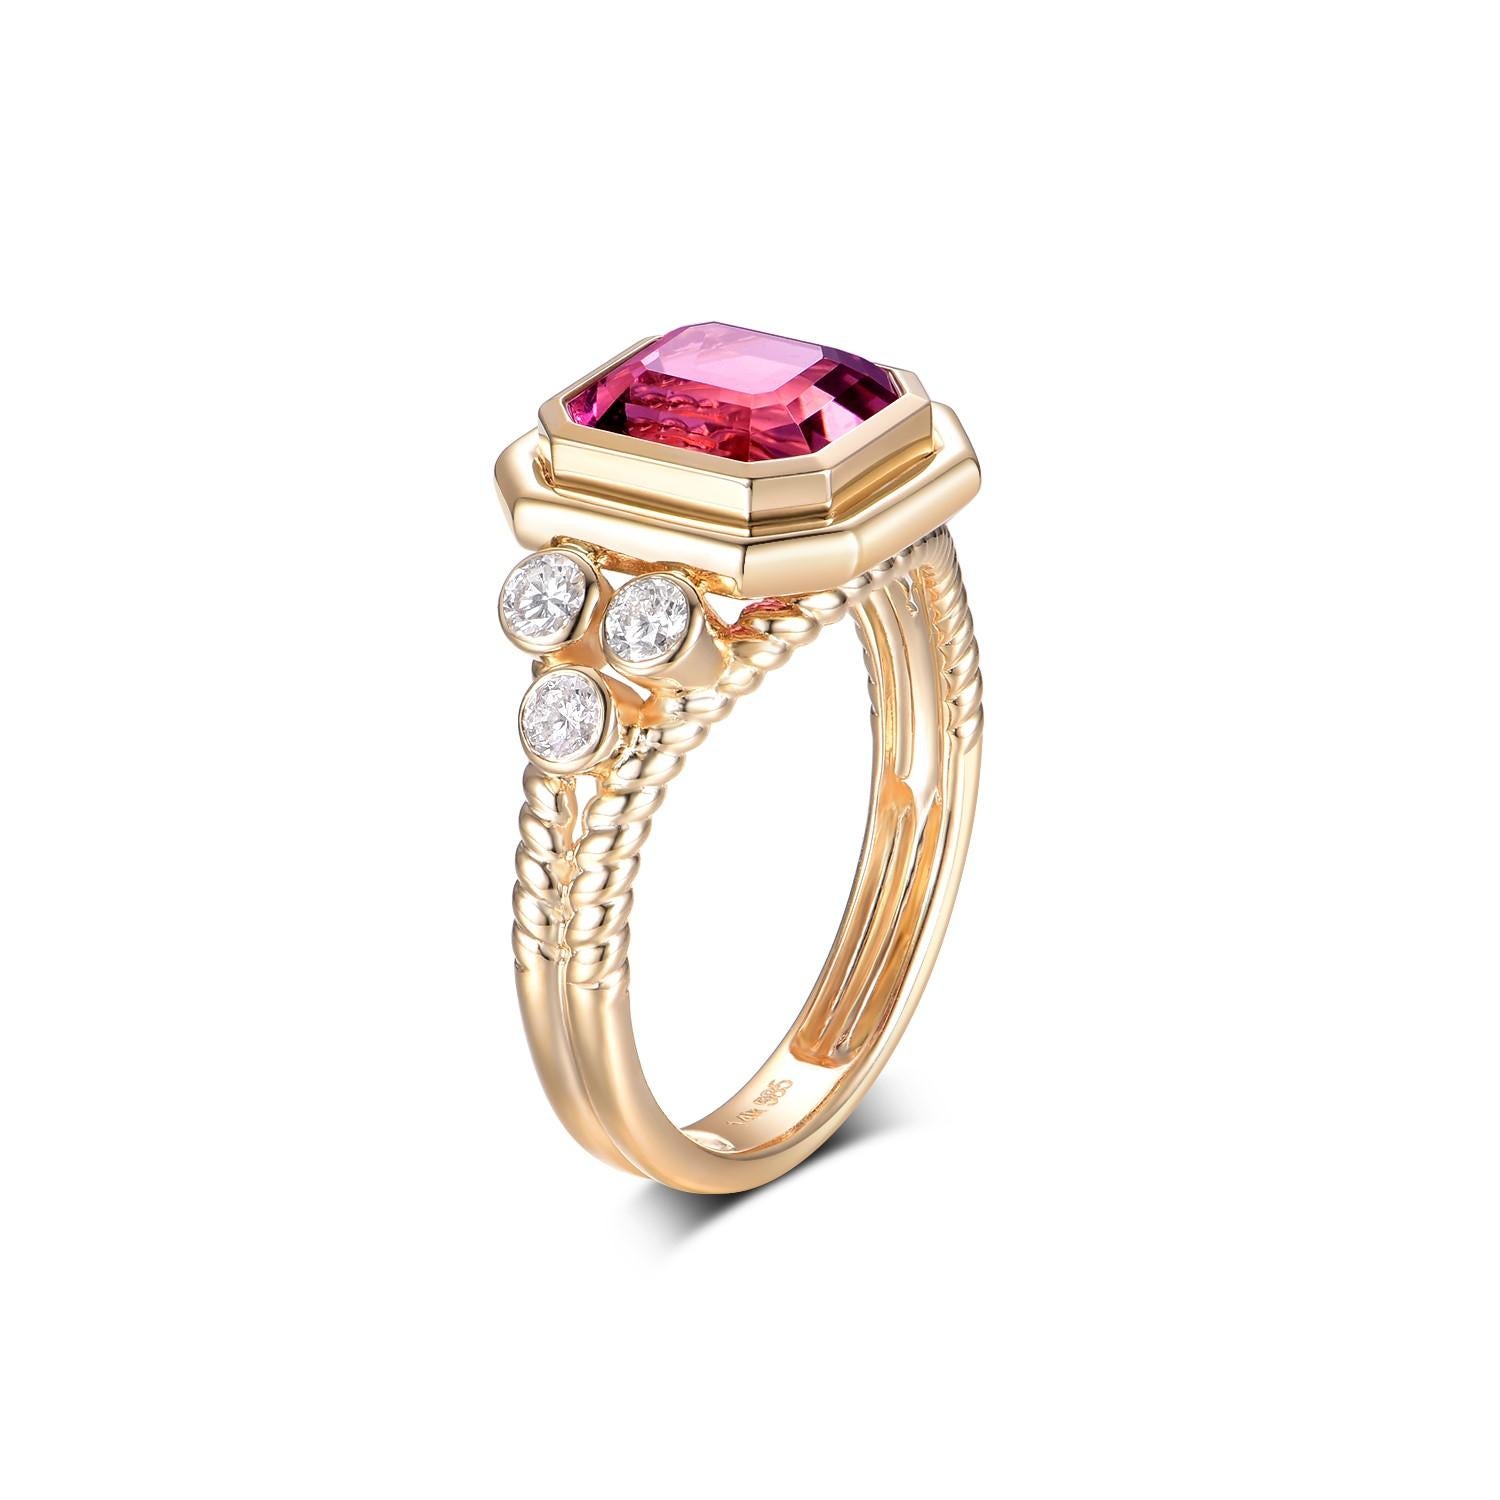 This ring is a beautifully crafted piece in 18-karat yellow gold, featuring a stunning 3.41-carat tourmaline as its centerpiece. The tourmaline boasts a rich, deep pink hue that captures the eye with its vivid color and crystalline clarity. Cut in